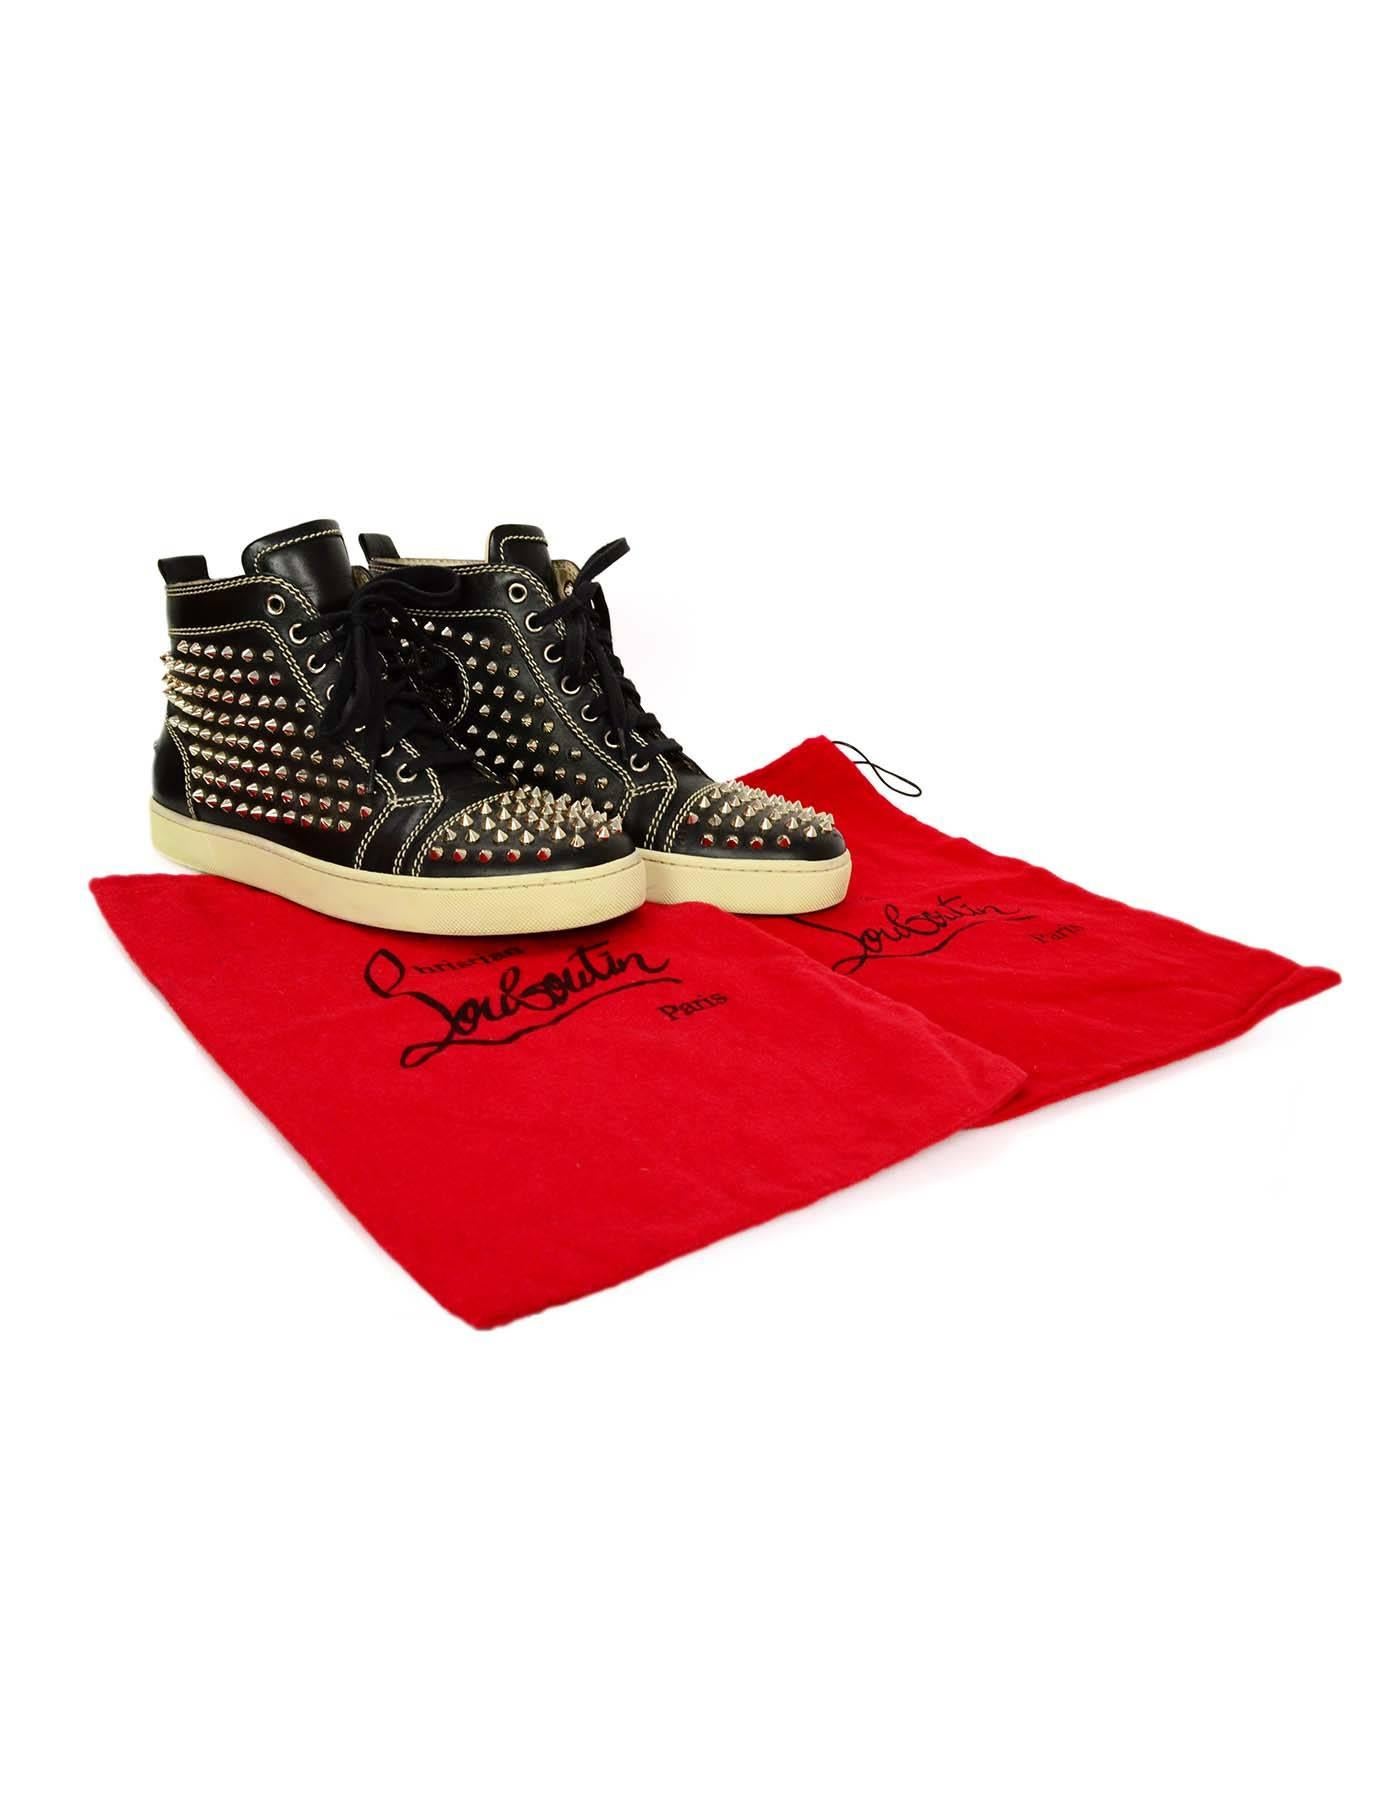 Christian Louboutin Black Leather Louis Spike High-top Studded Sneakers Sz 41 5